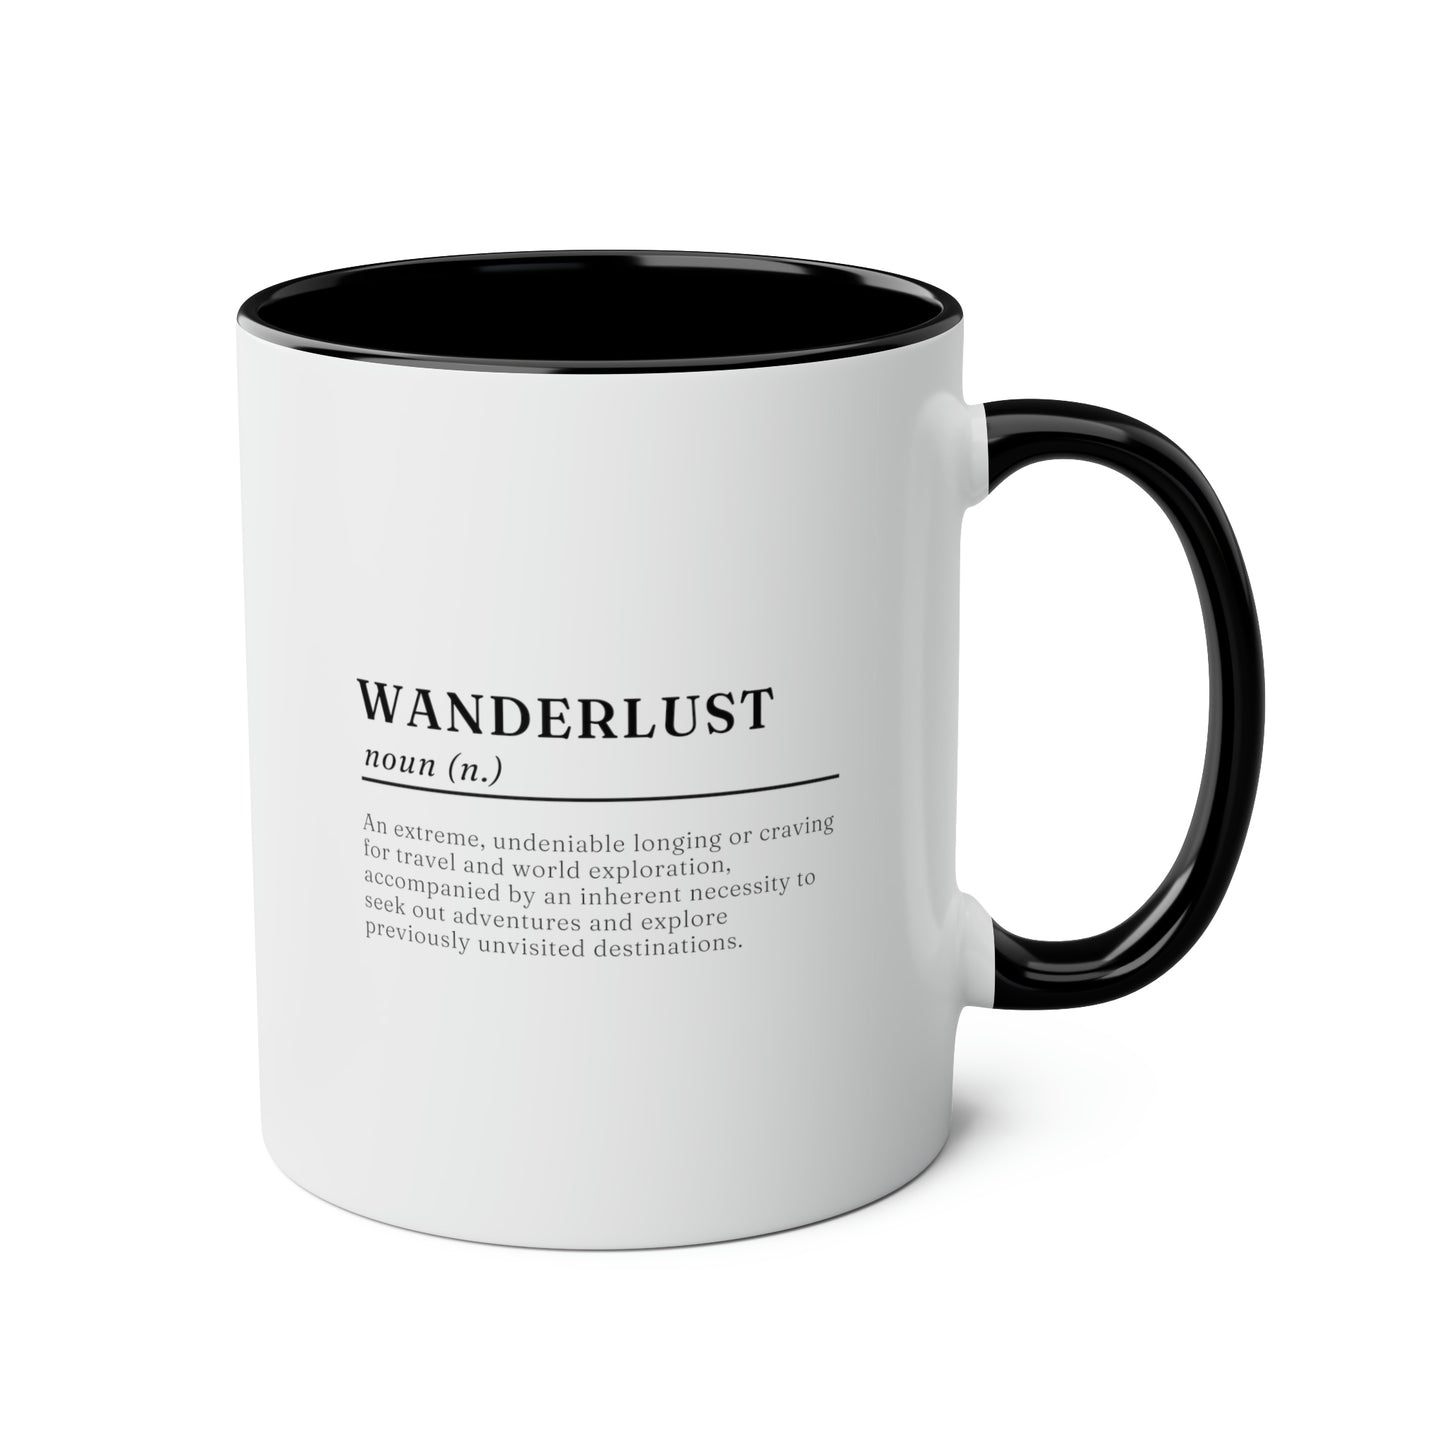 Wanderlust Definition 11oz white with black accent funny large coffee mug gift for traveler backpacker outdoors quote minimalist adventure waveywares wavey wares wavywares wavy wares